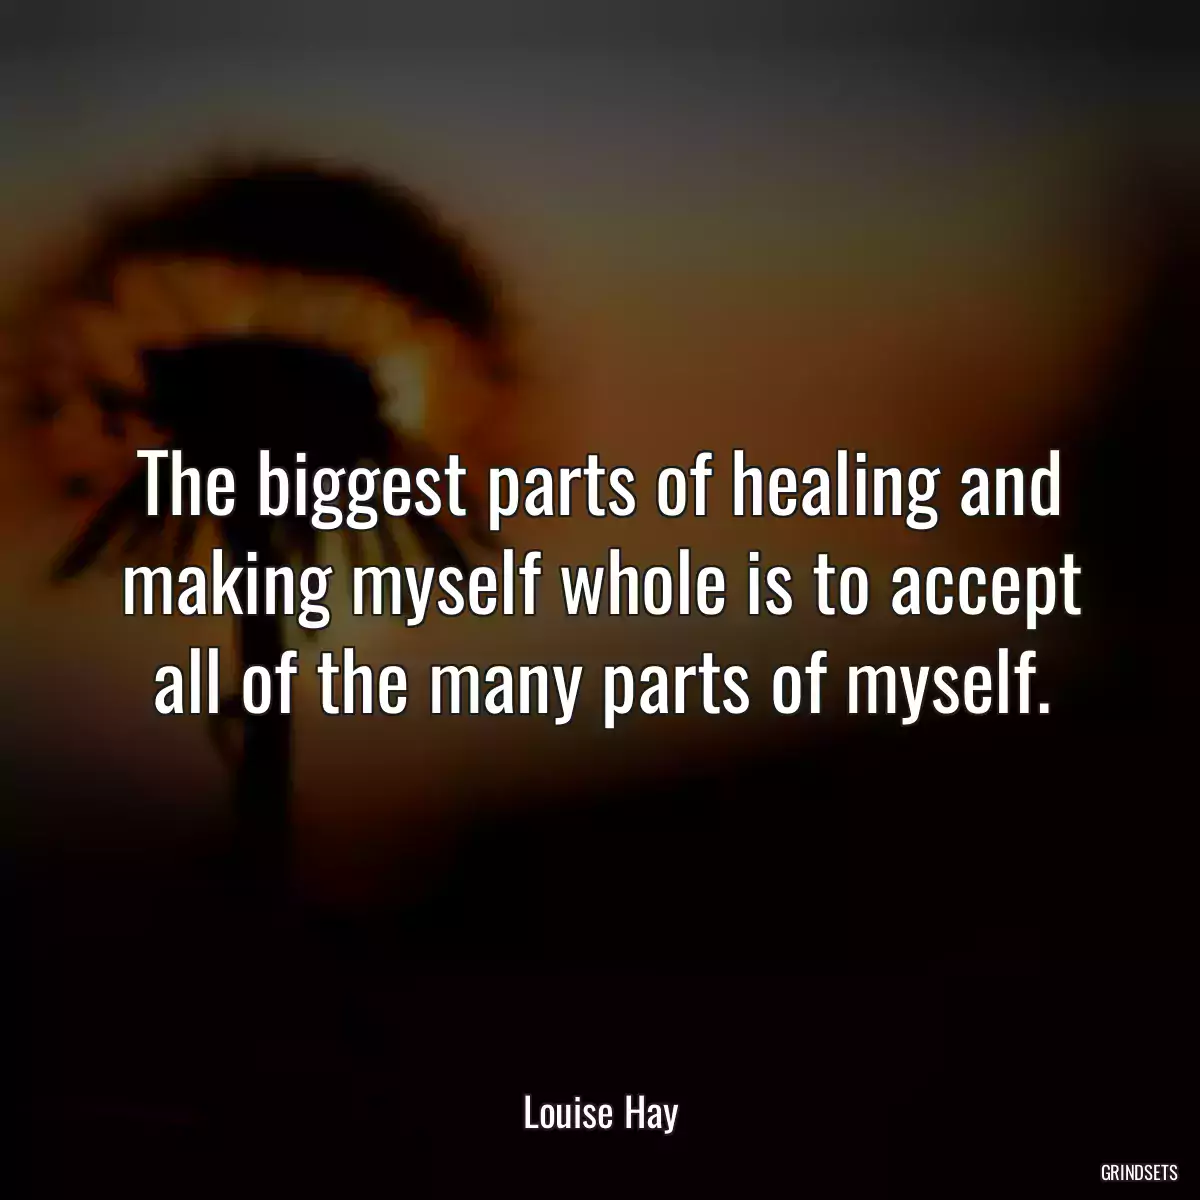 The biggest parts of healing and making myself whole is to accept all of the many parts of myself.